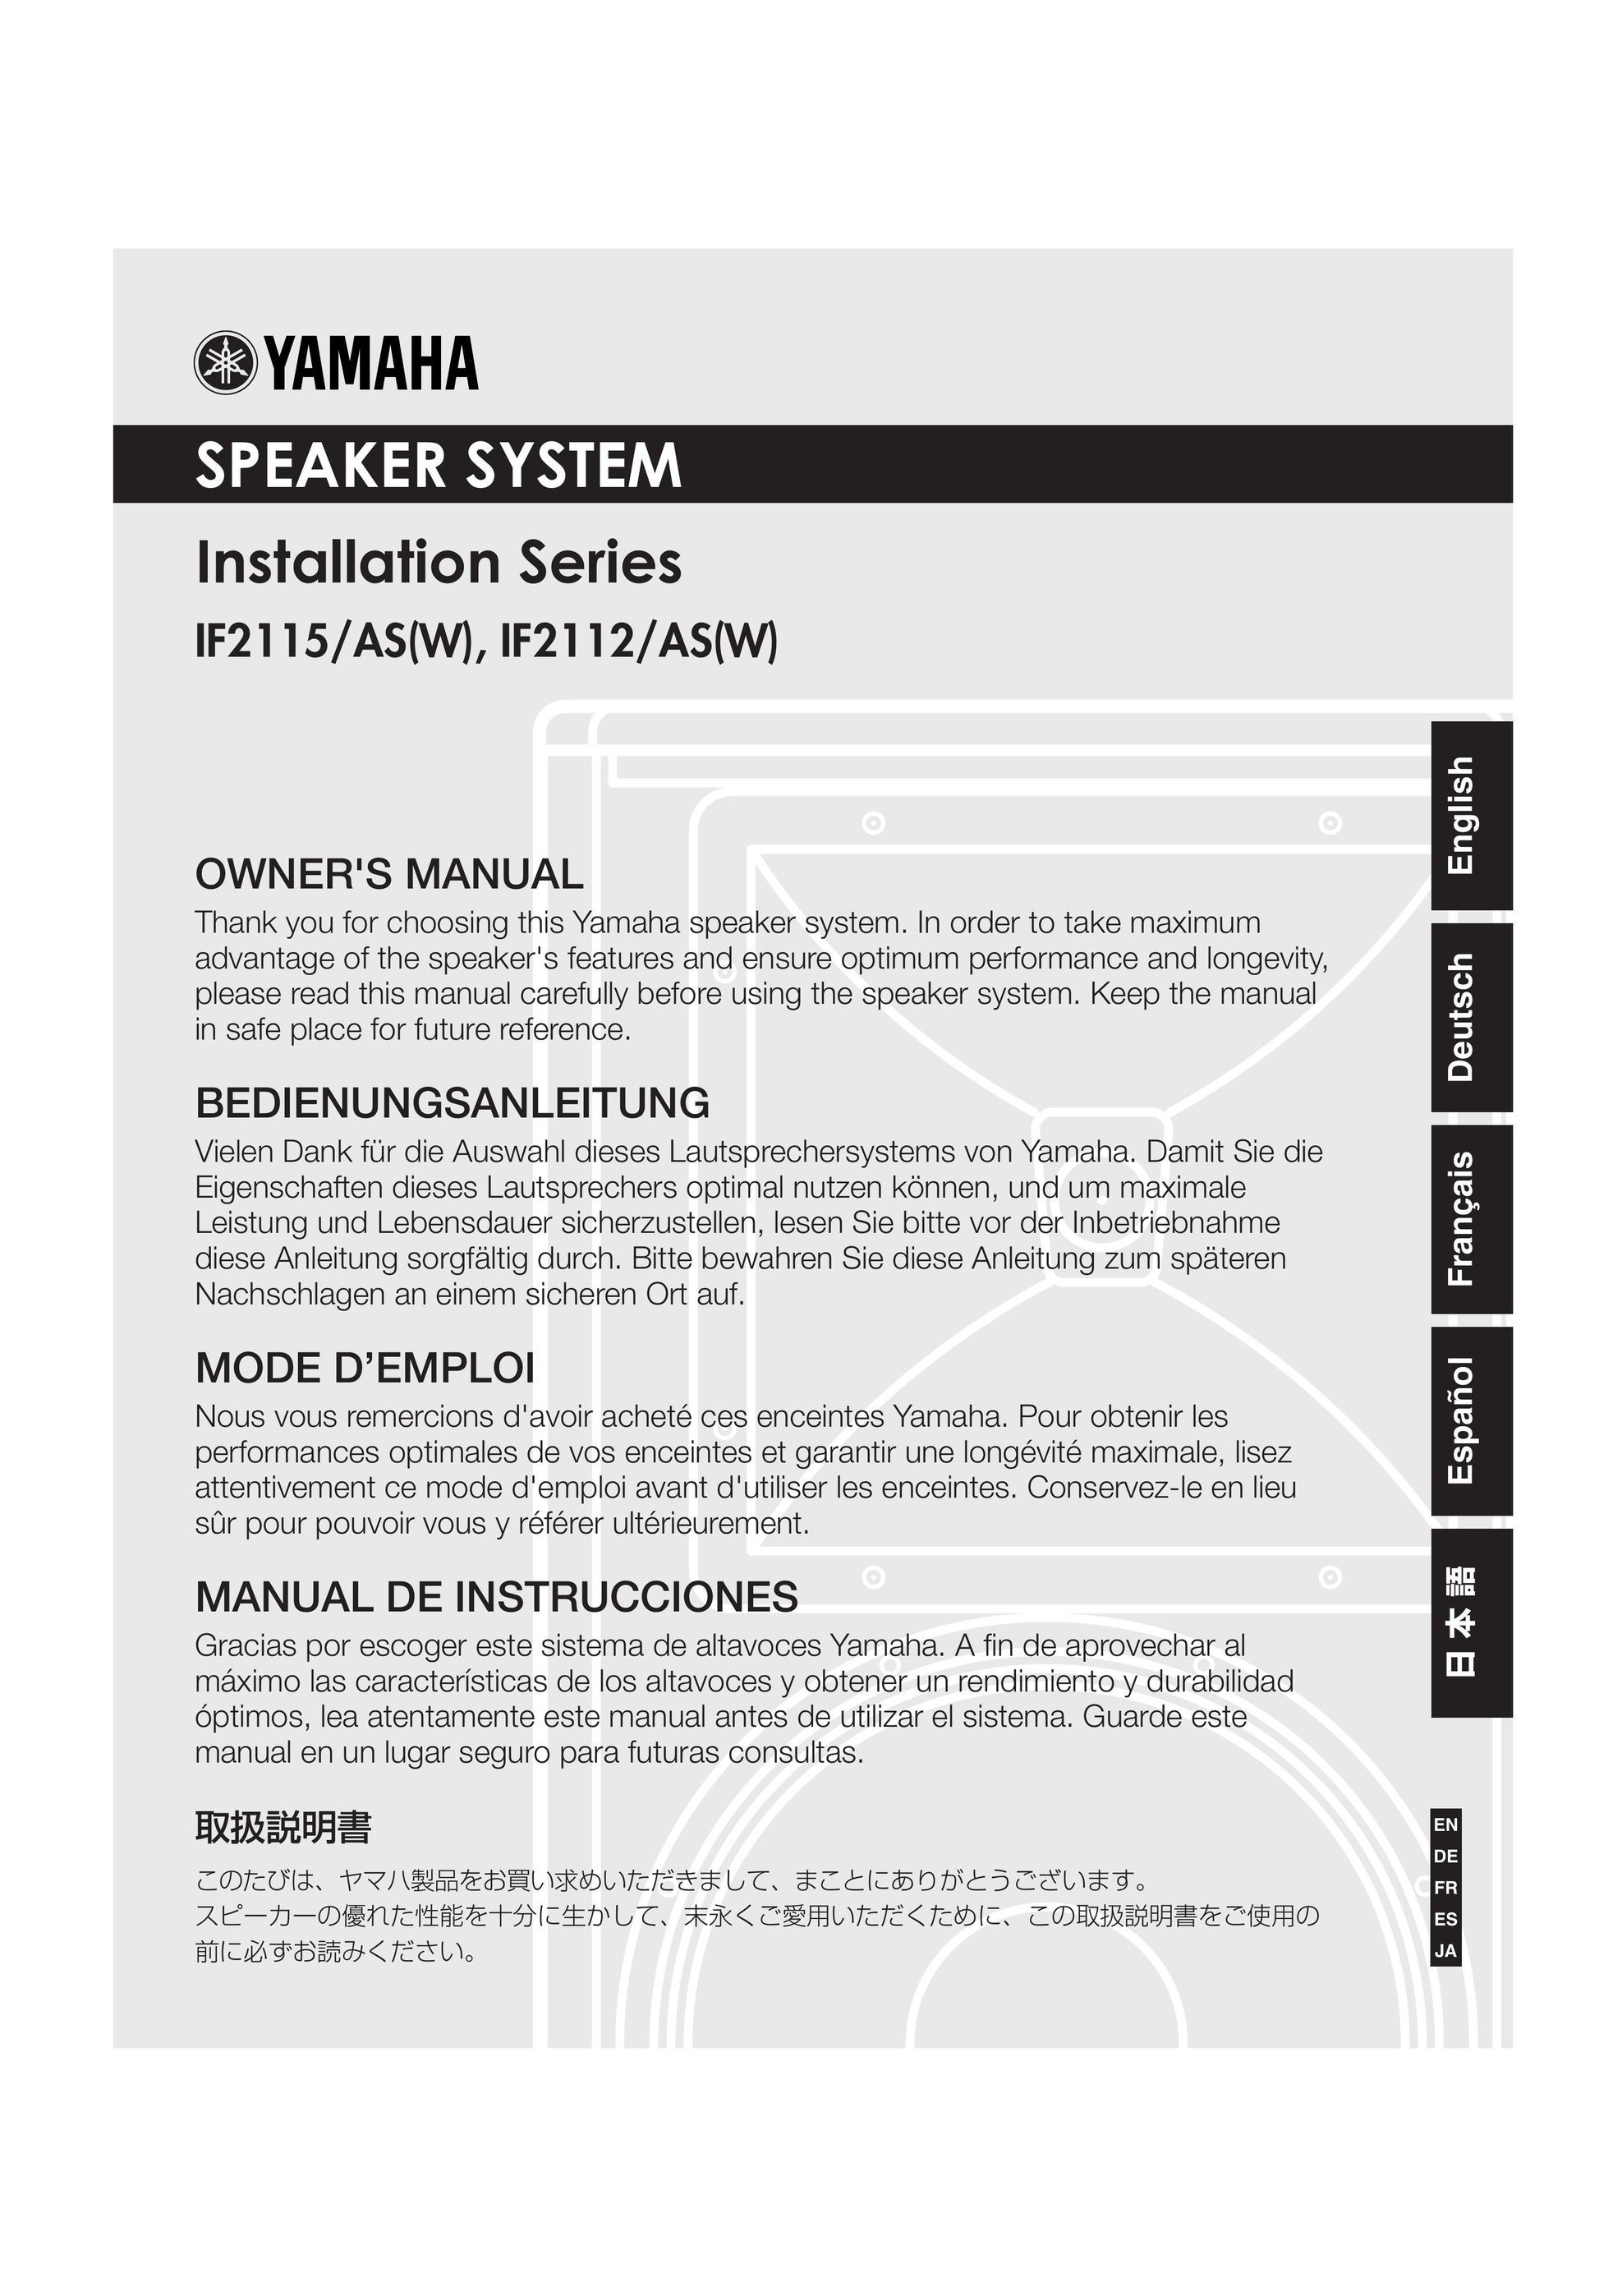 Yamaha F2112/AS(W) Portable Speaker User Manual (Page 1)